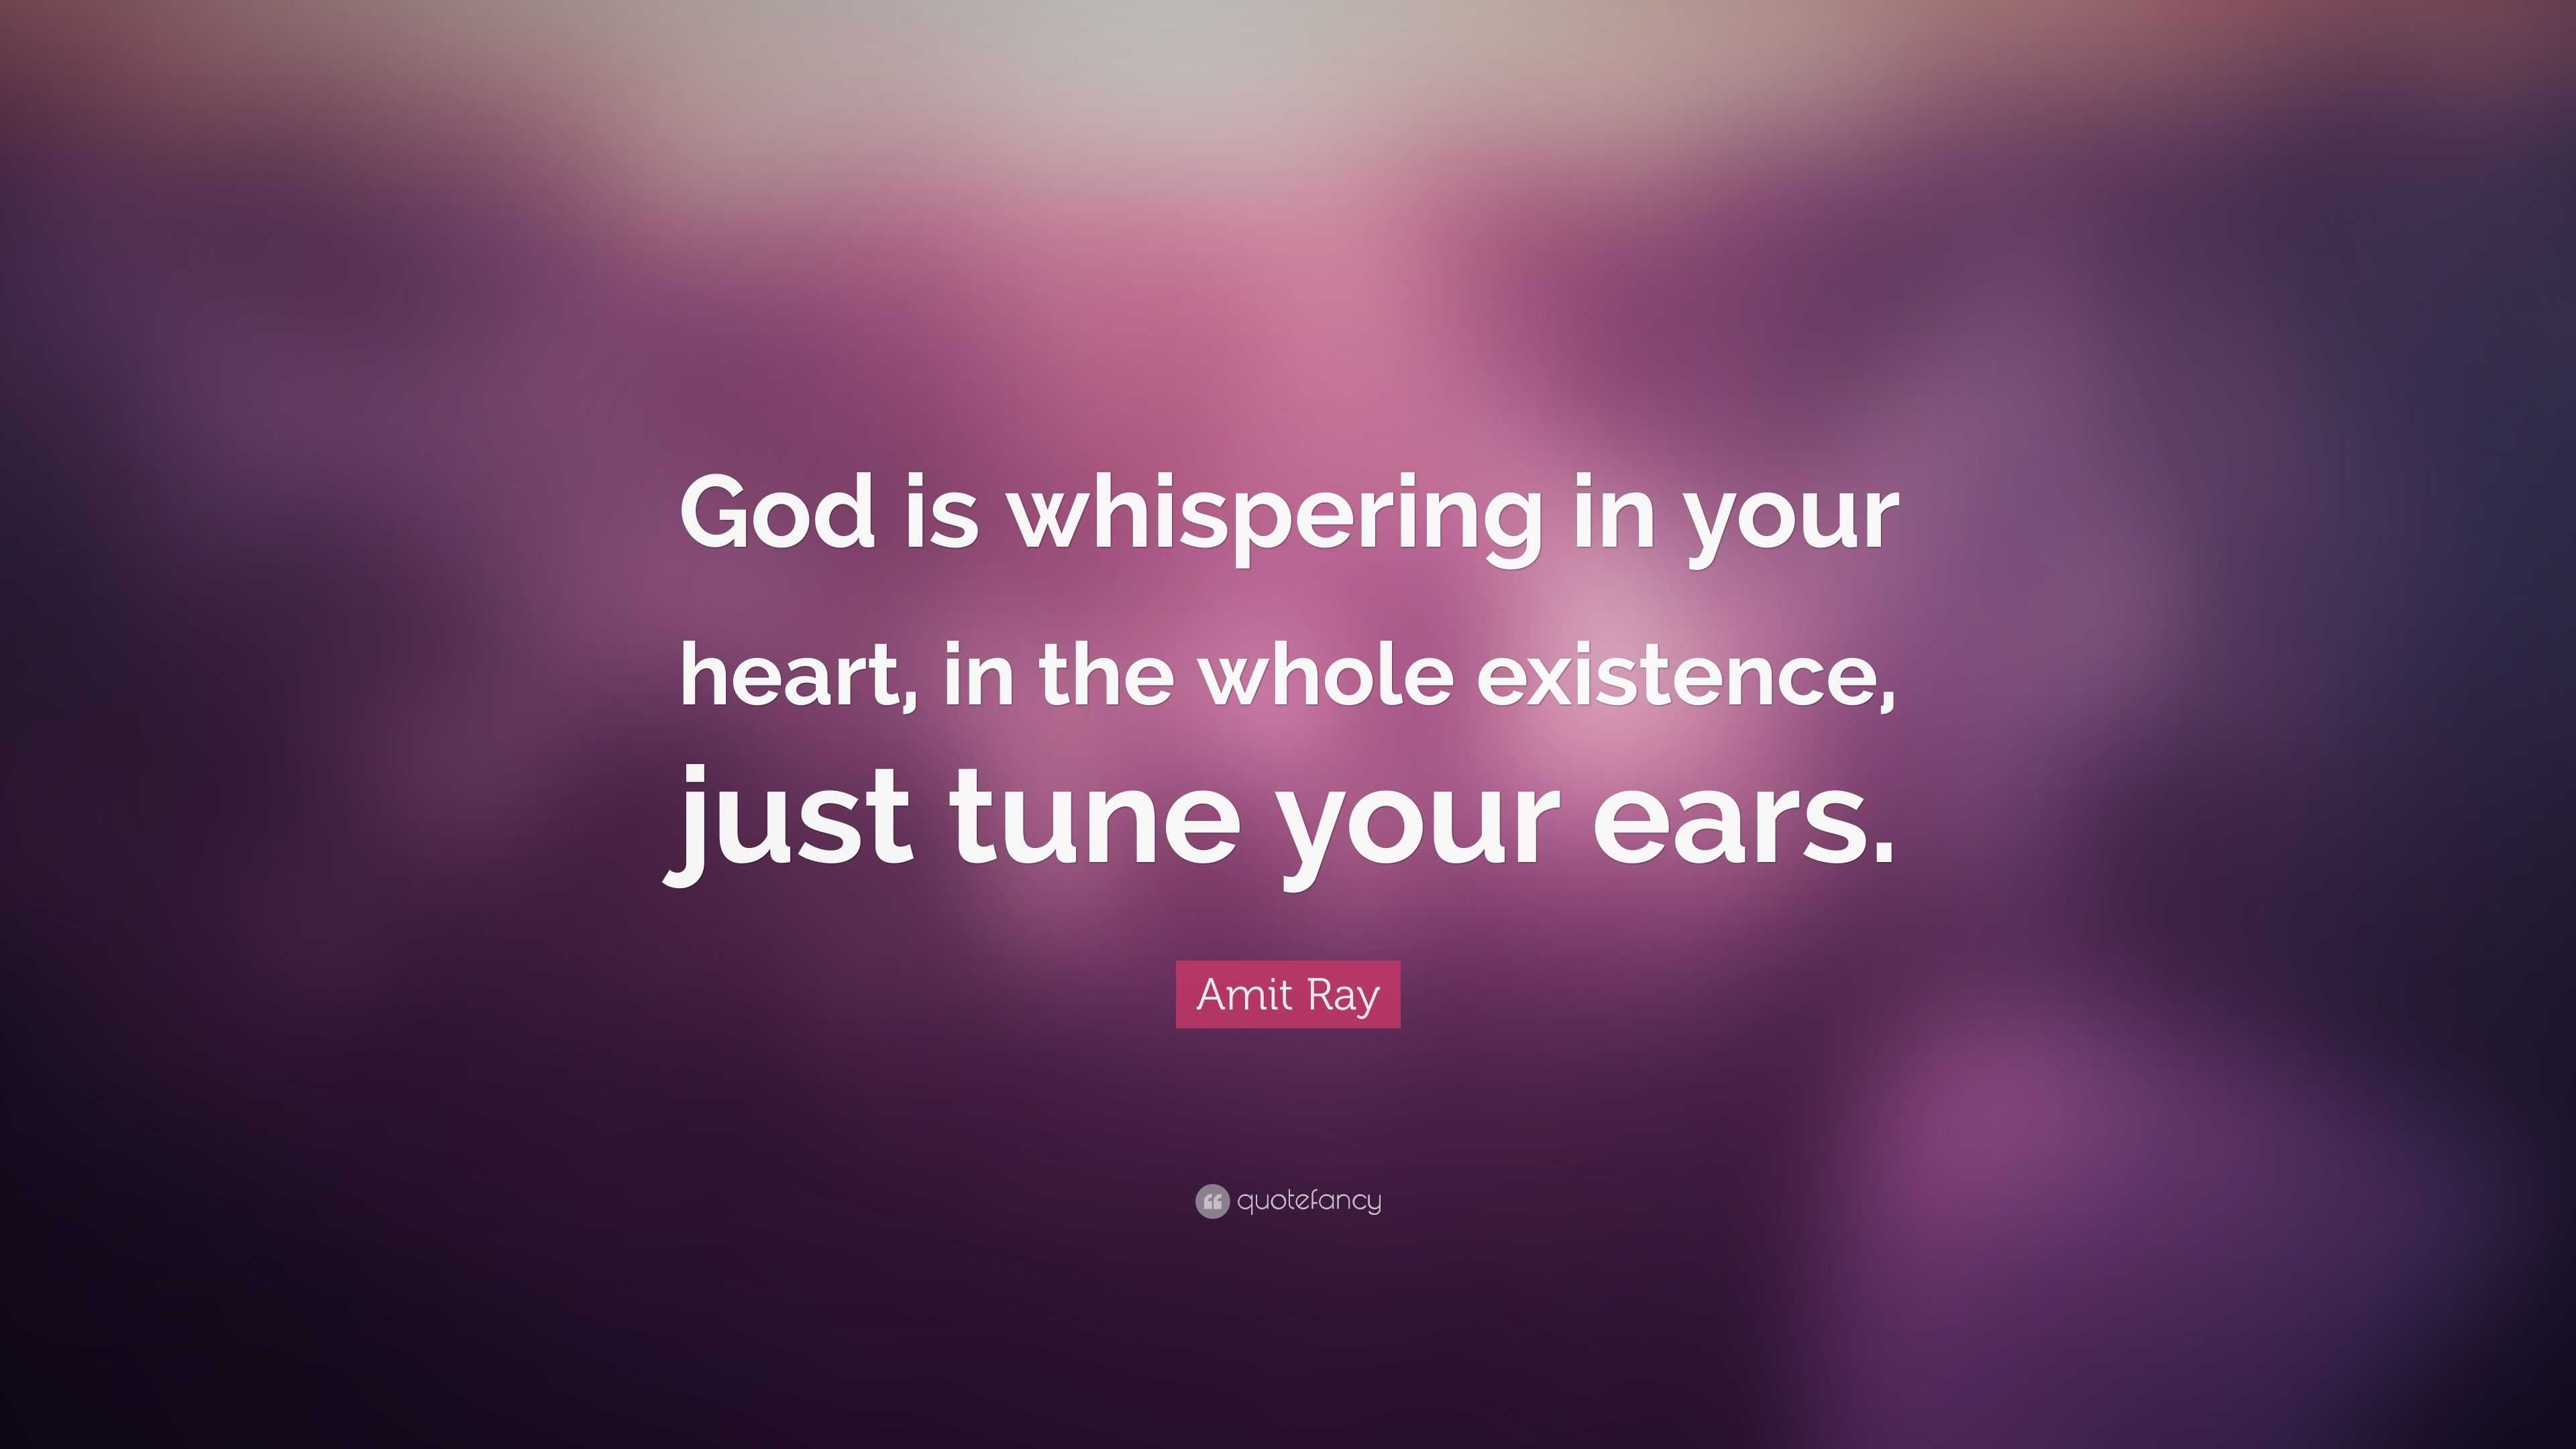 Amit Ray Quote: “God is whispering in your heart, in the whole existence,  just tune your